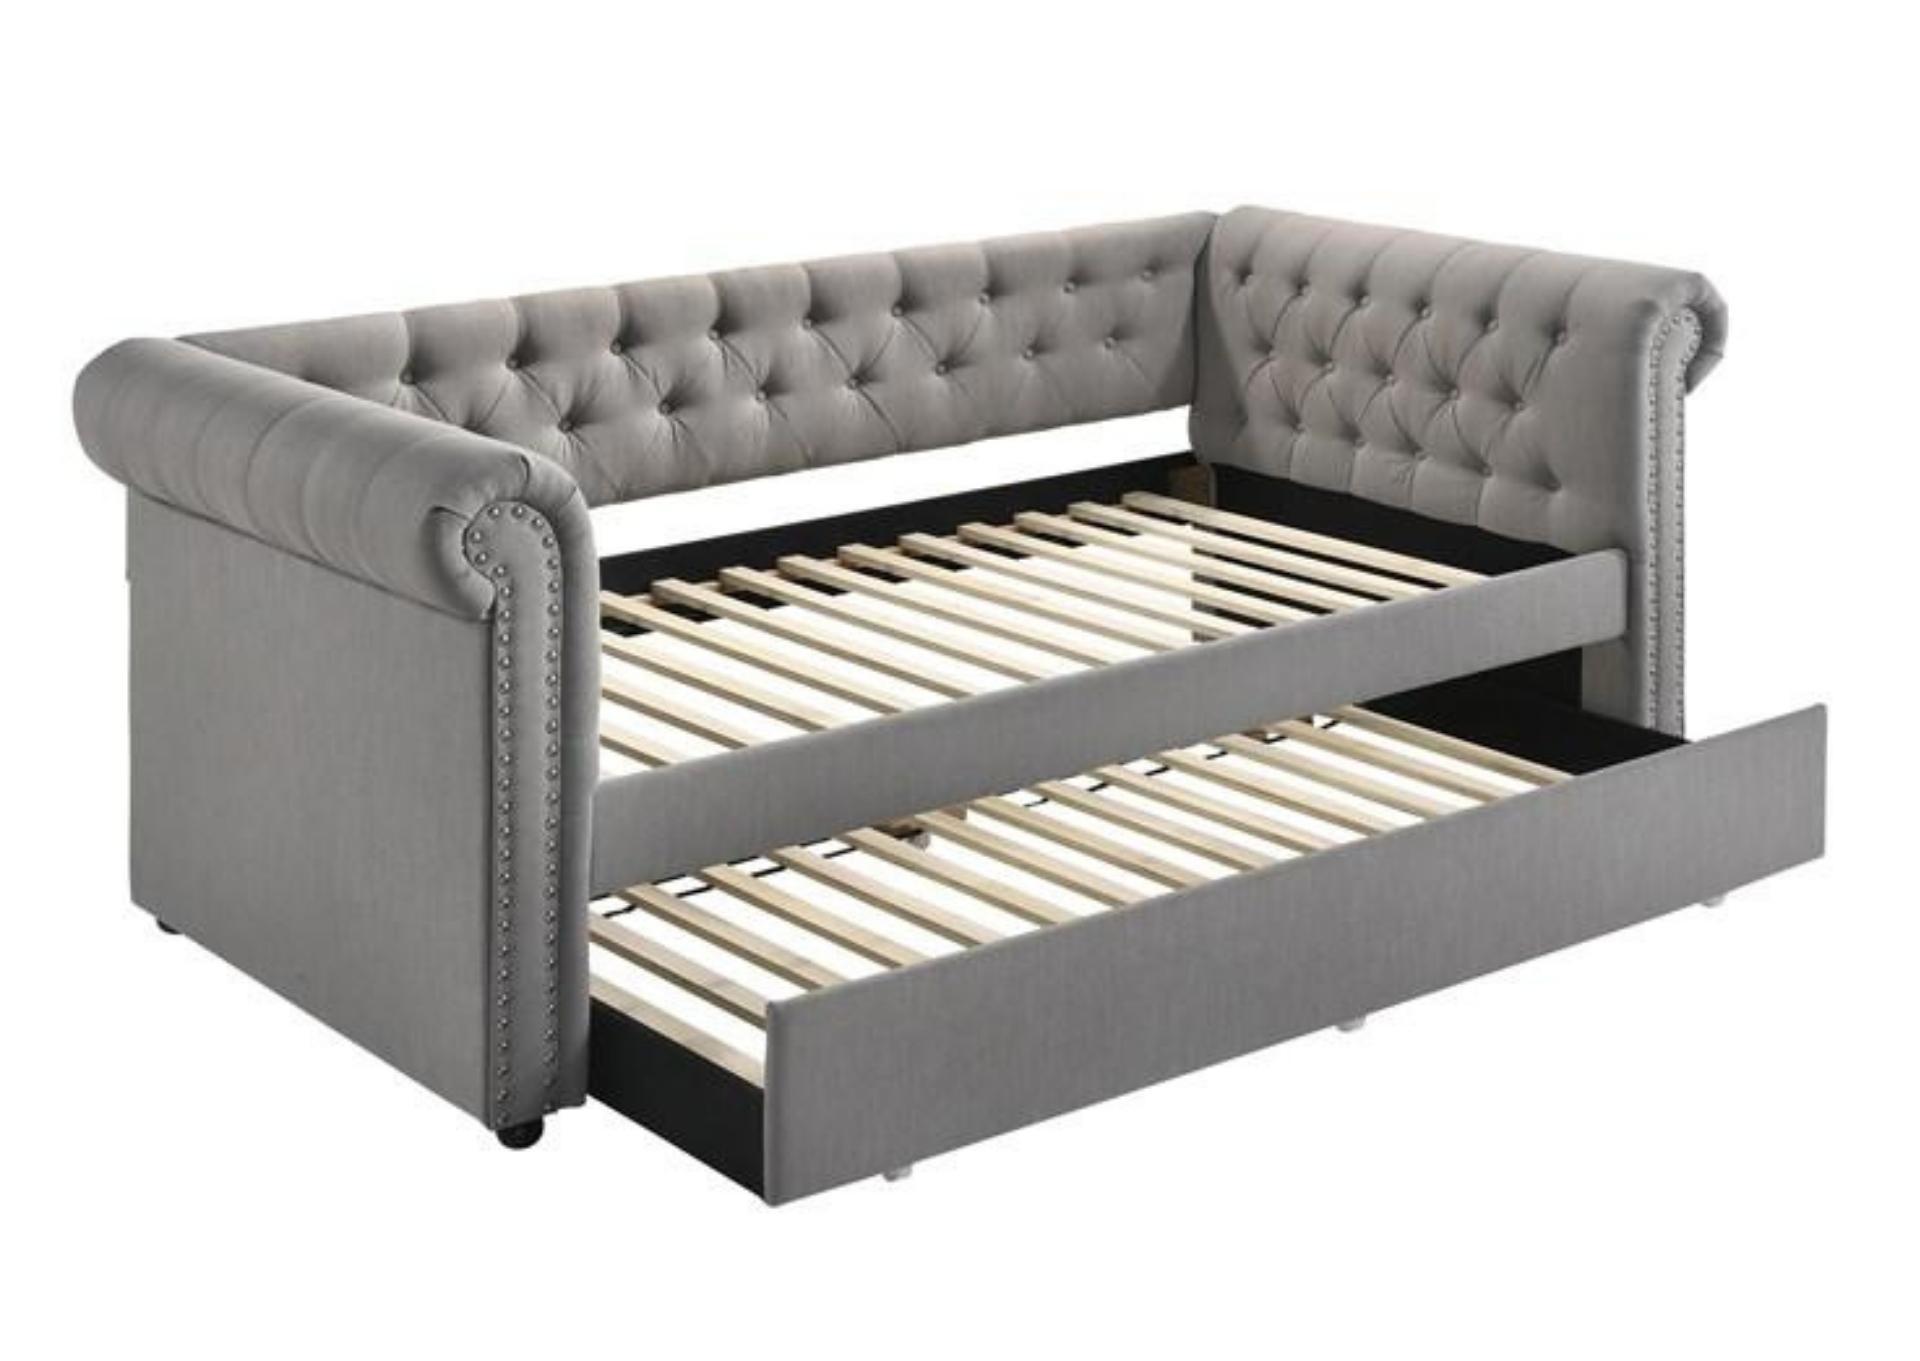 ELLIE DOVE DAYBED WITH TRUNDLE,CROWN MARK INT.